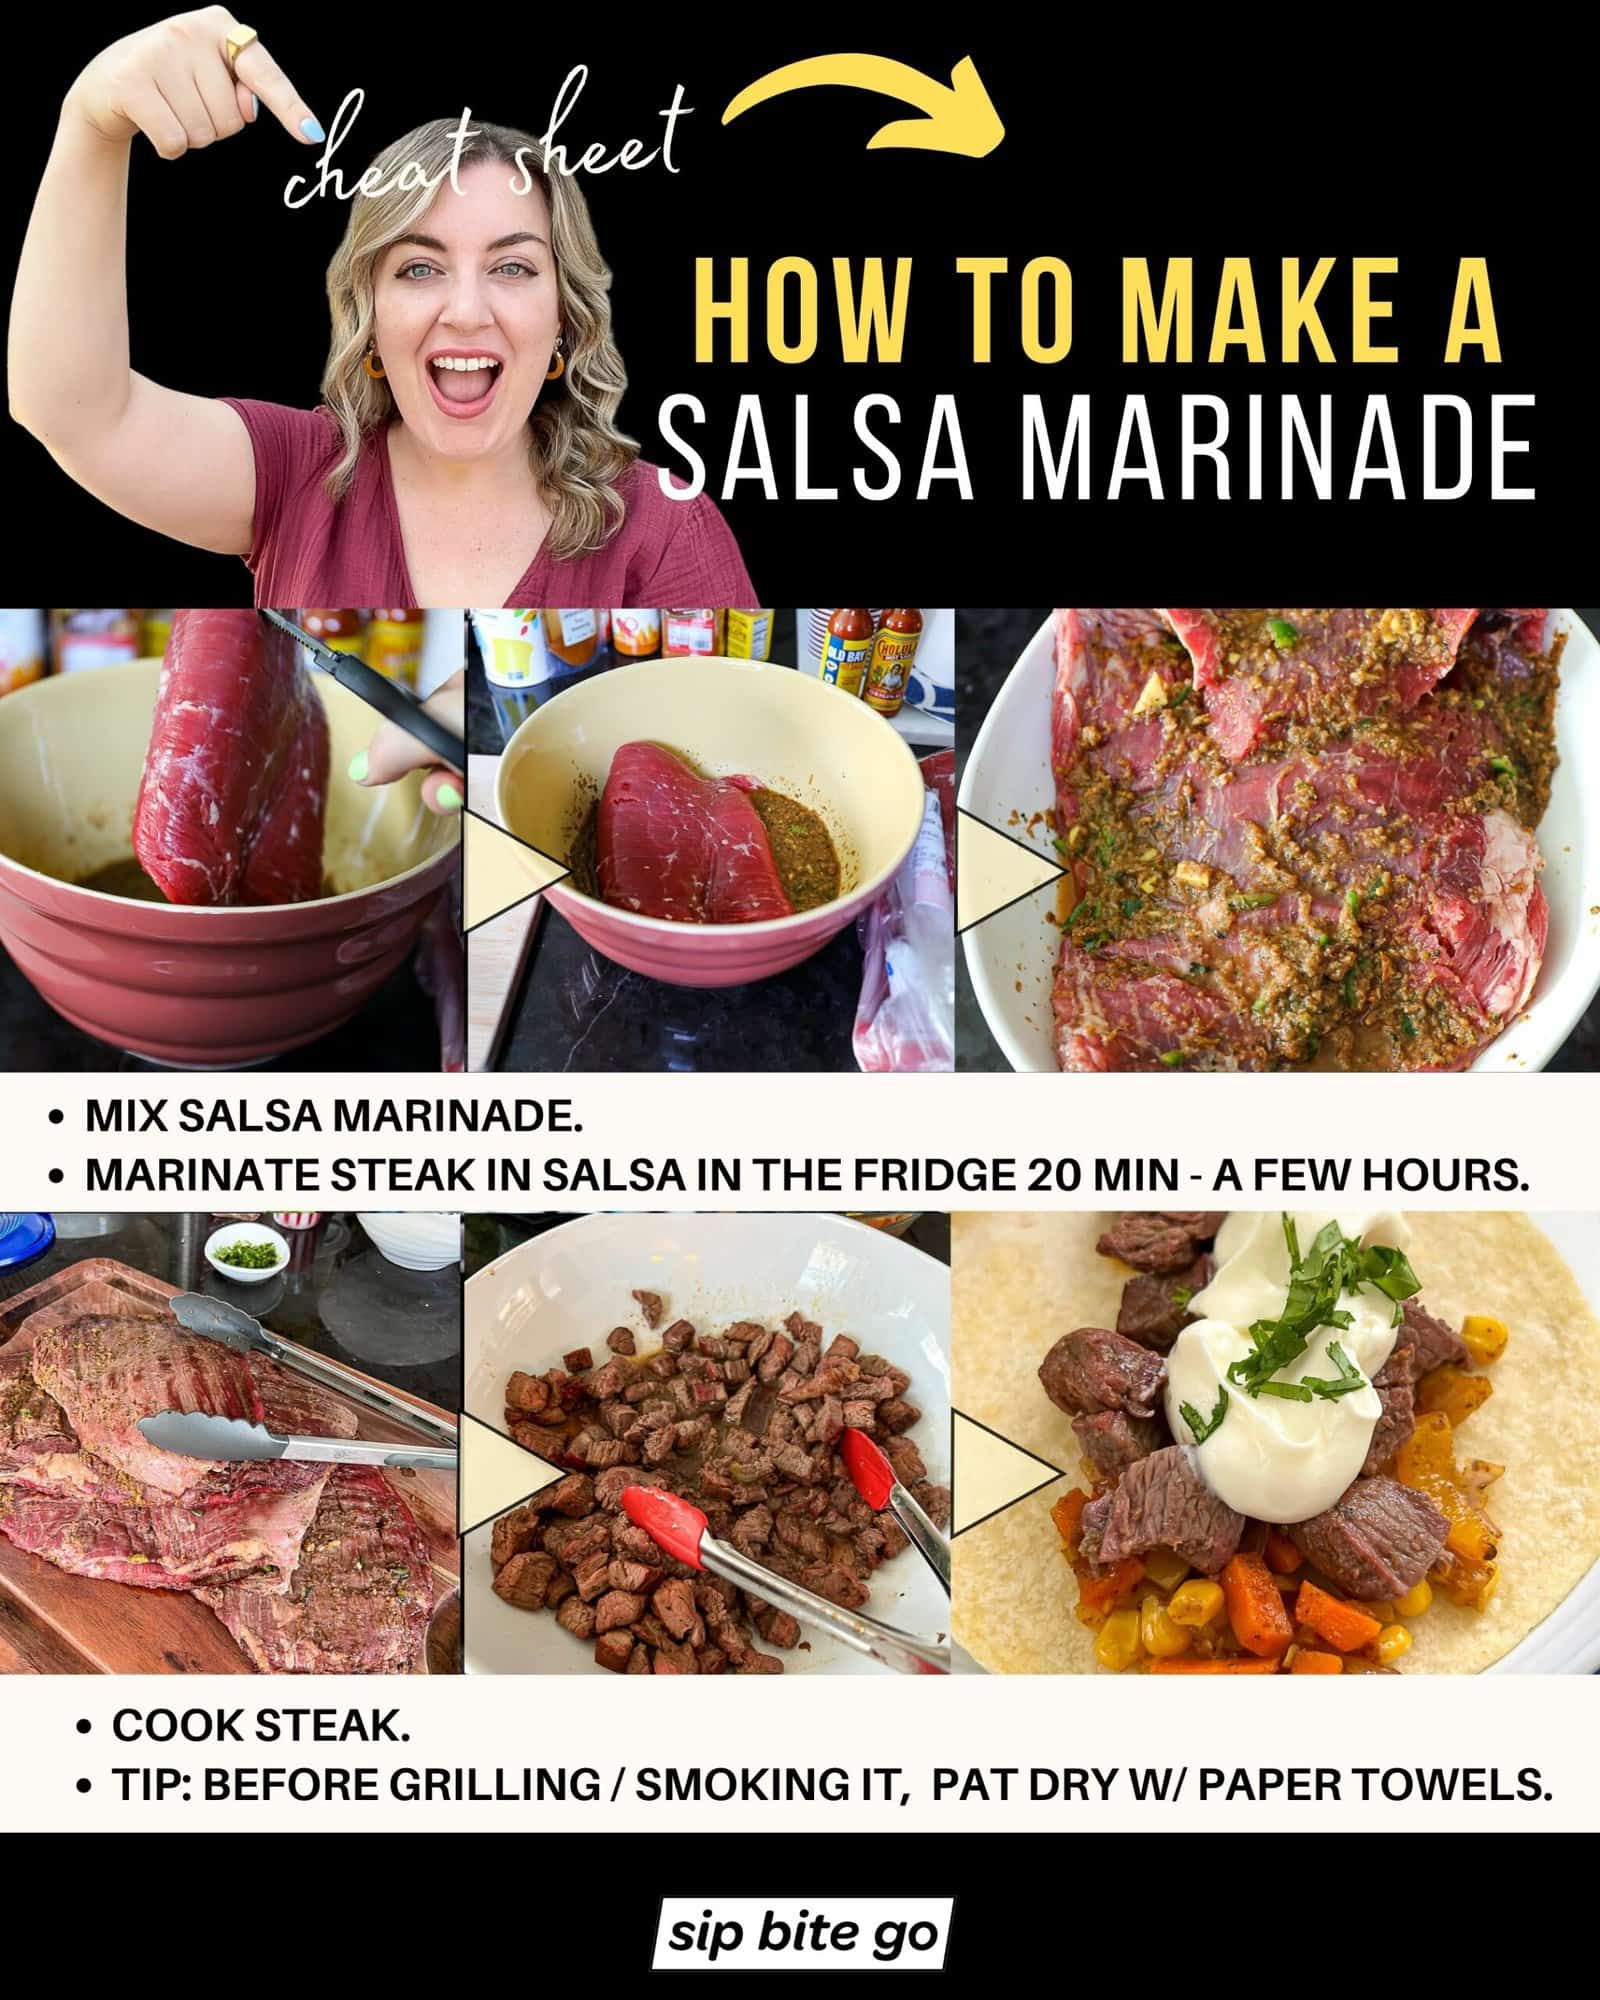 Infographic demonstrating how to make a steak salsa marinade for smoking on the Traeger or grilling beef